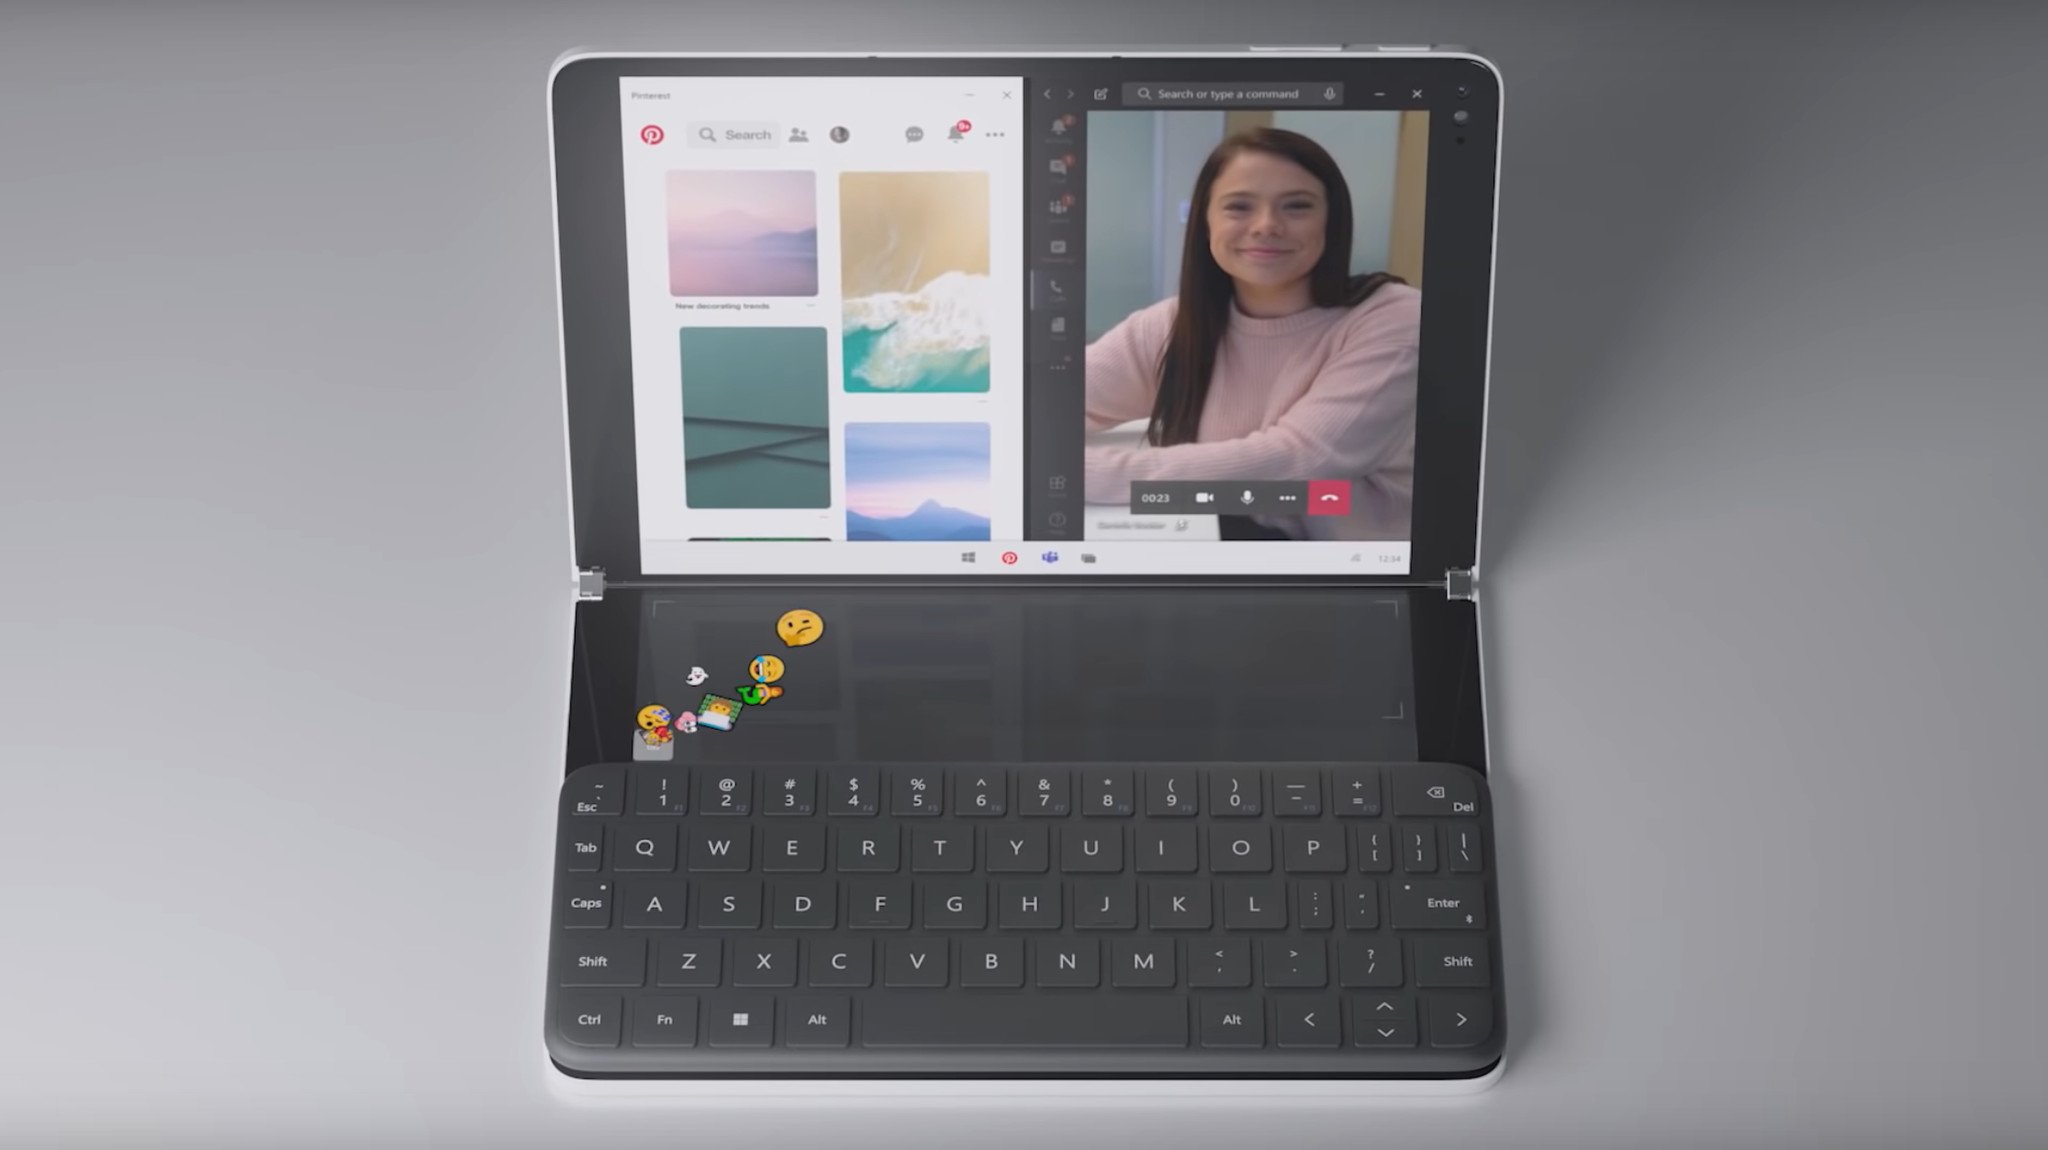 https://www.windowscentral.com/sites/wpcentral.com/files/styles/large/public/field/image/2019/10/surface-neo-video-folded.jpg?itok=02-_G8XP